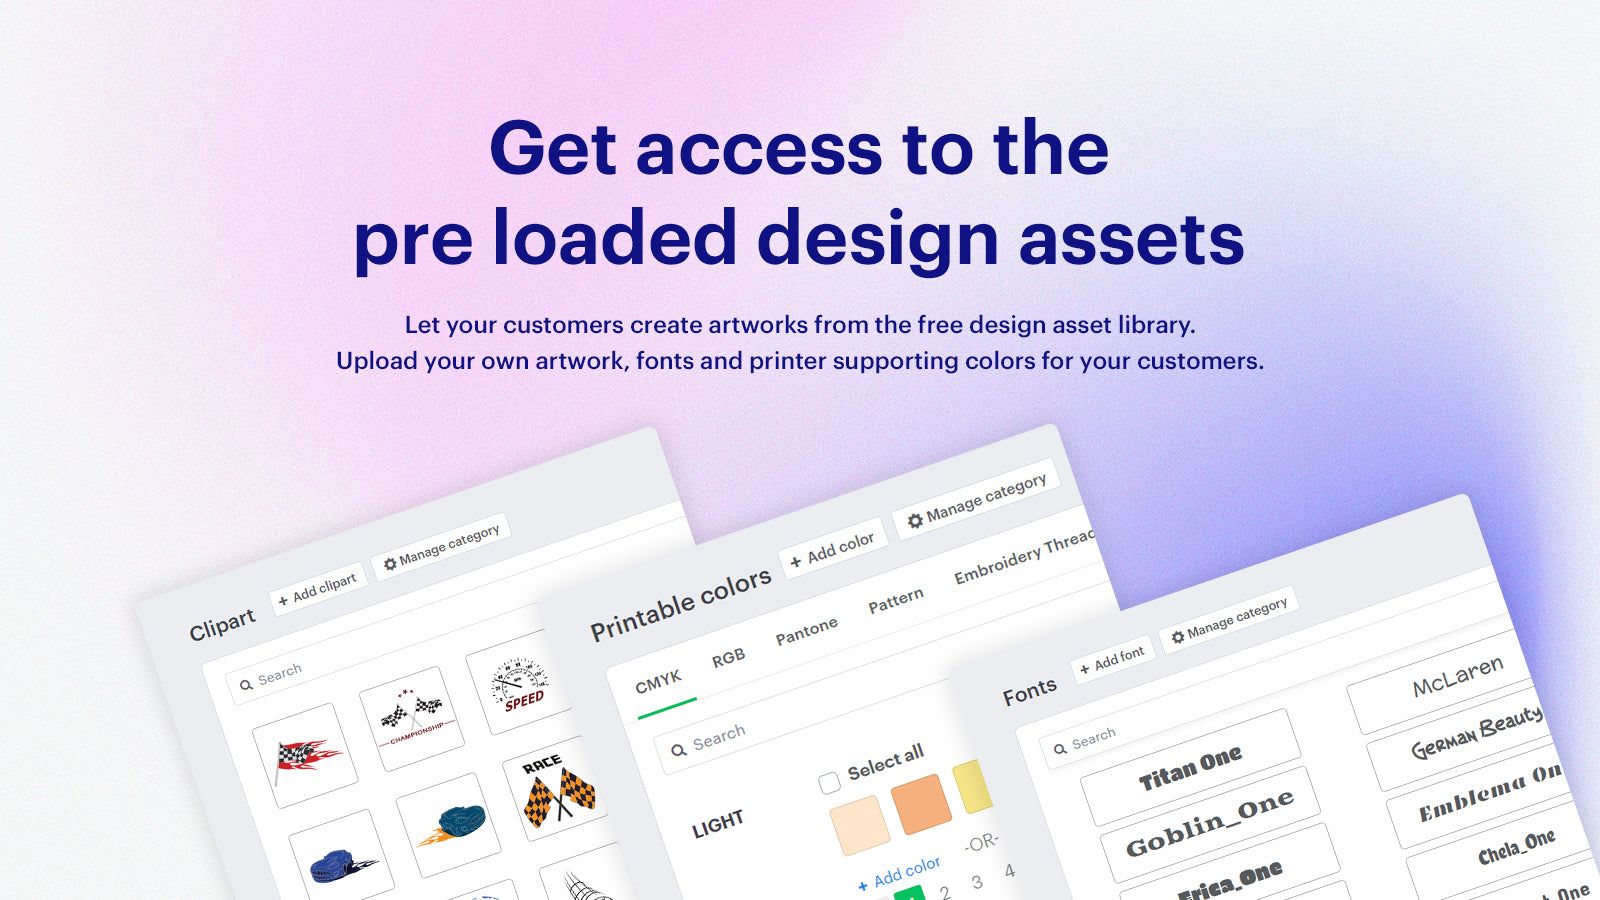 Pre loaded design asset library with custom uploads